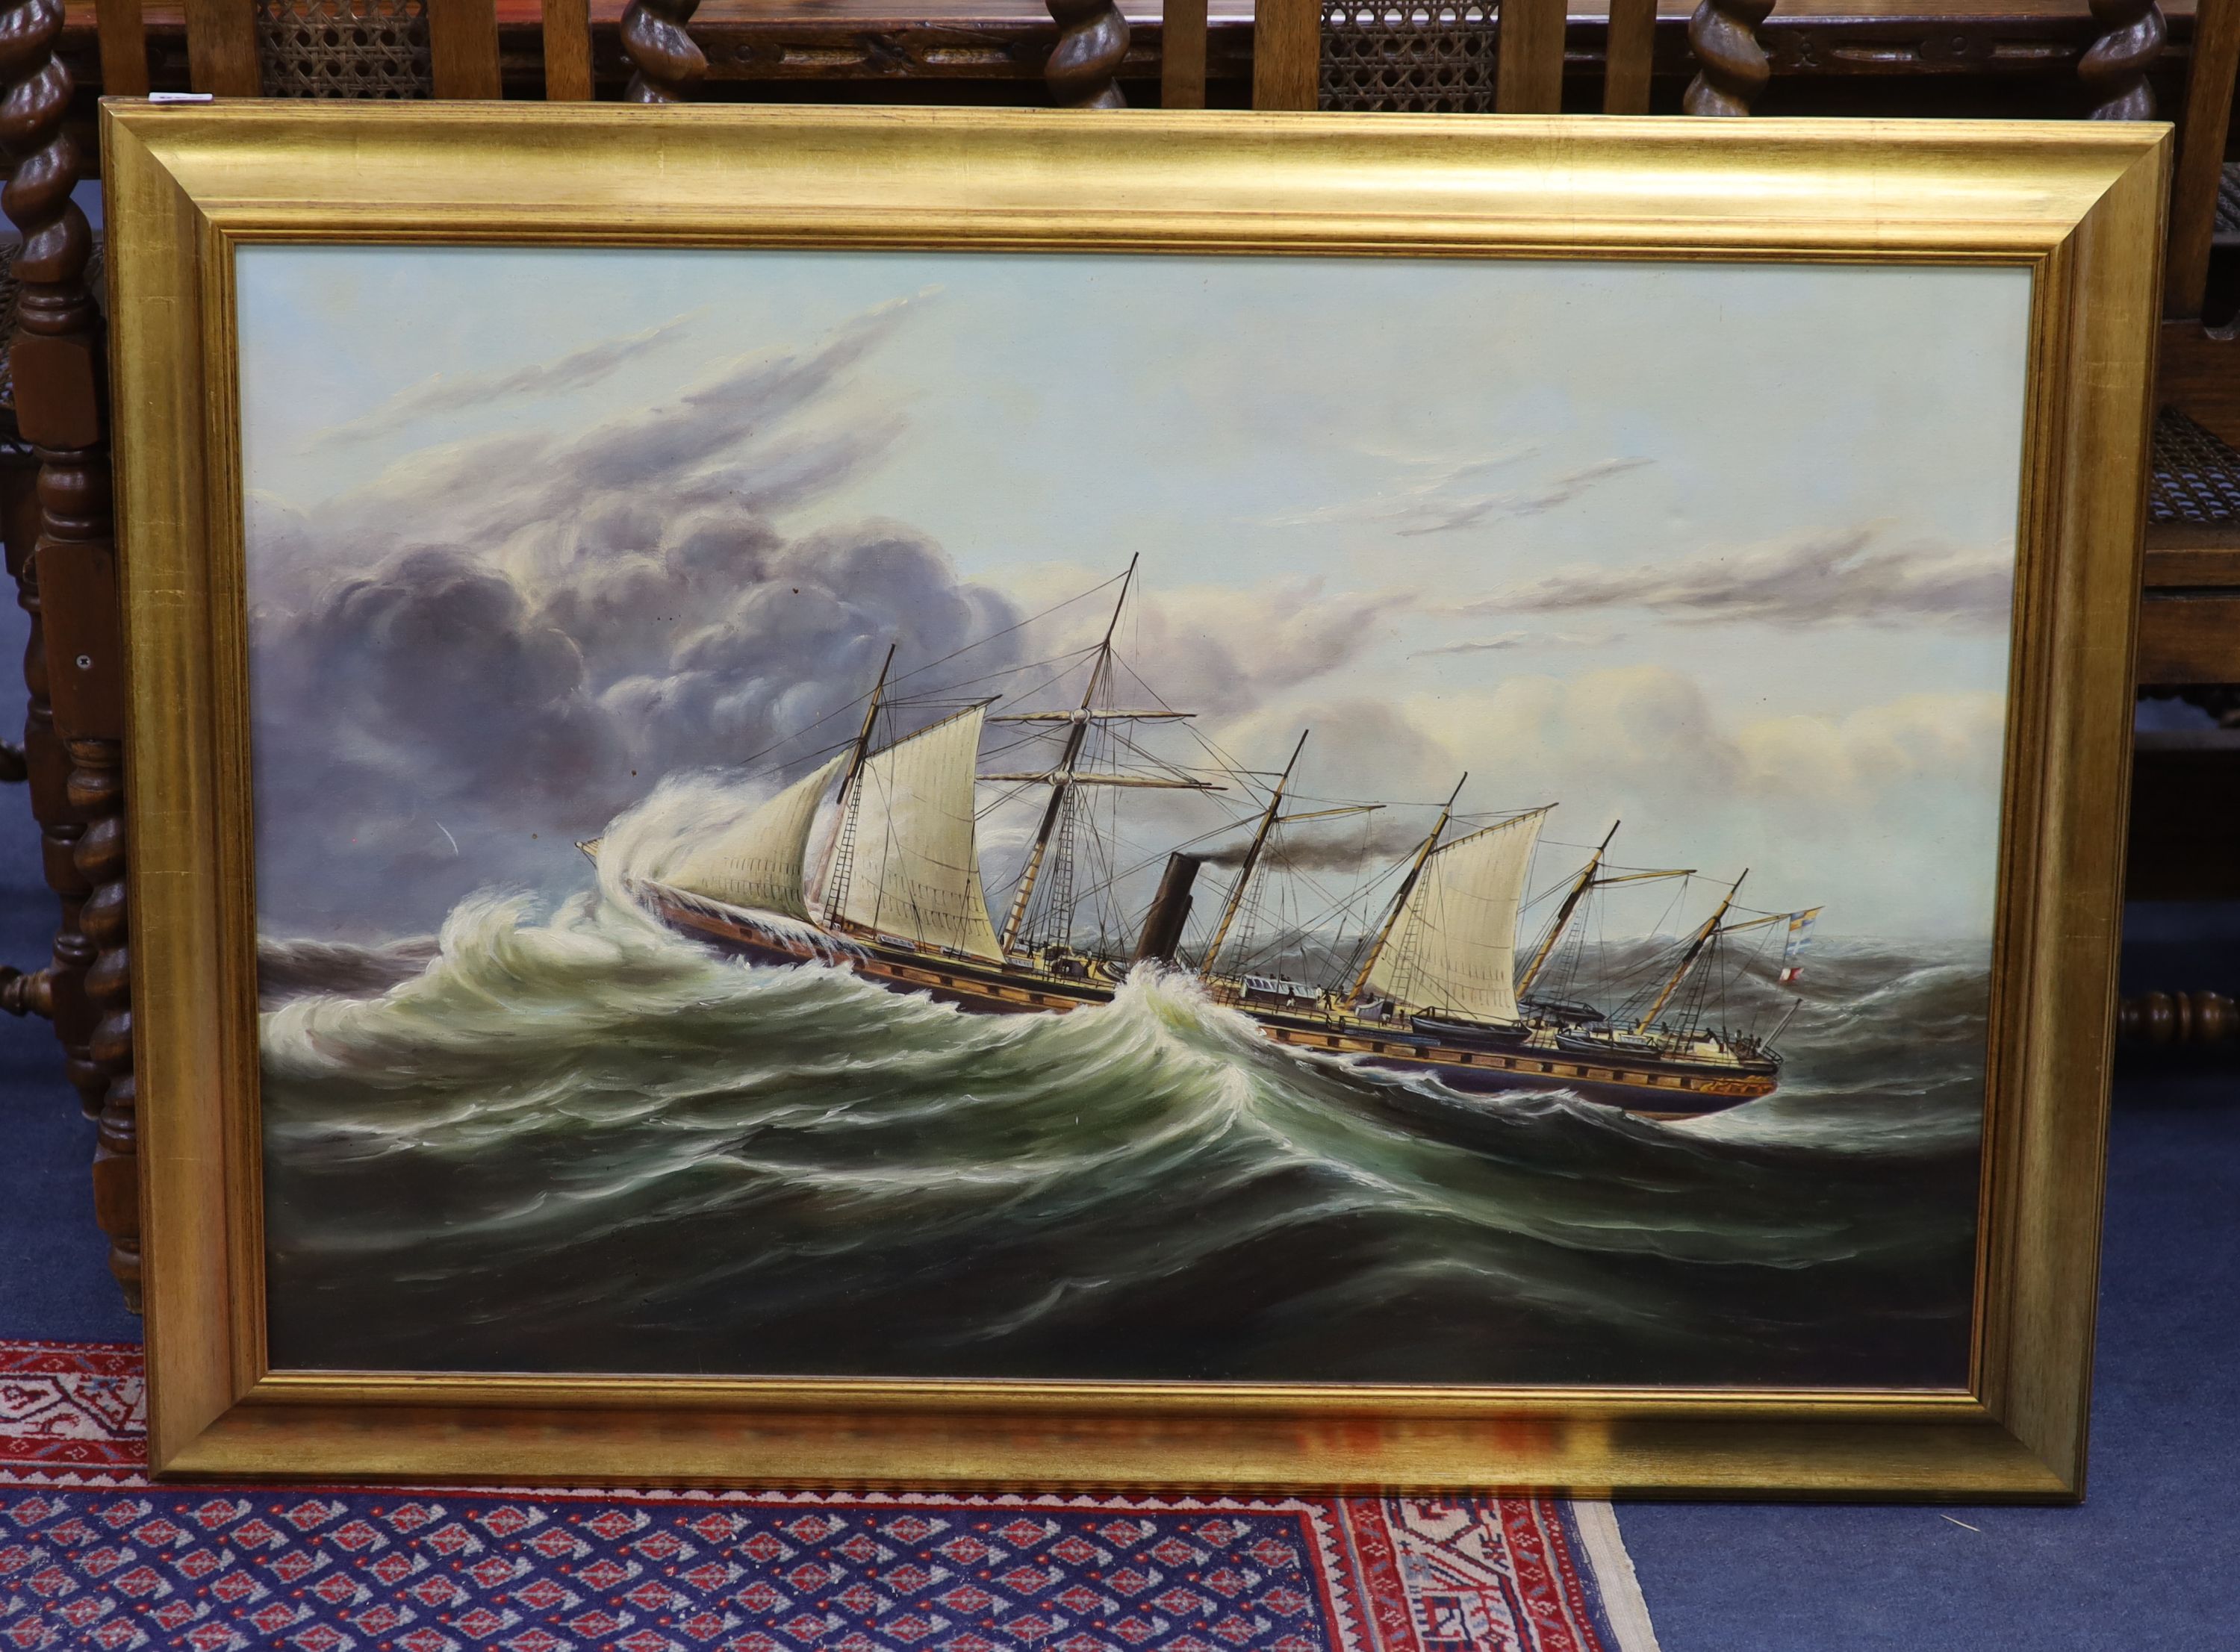 English School, oil on canvas, Steam and sail ship at sea, 60 x 91cm